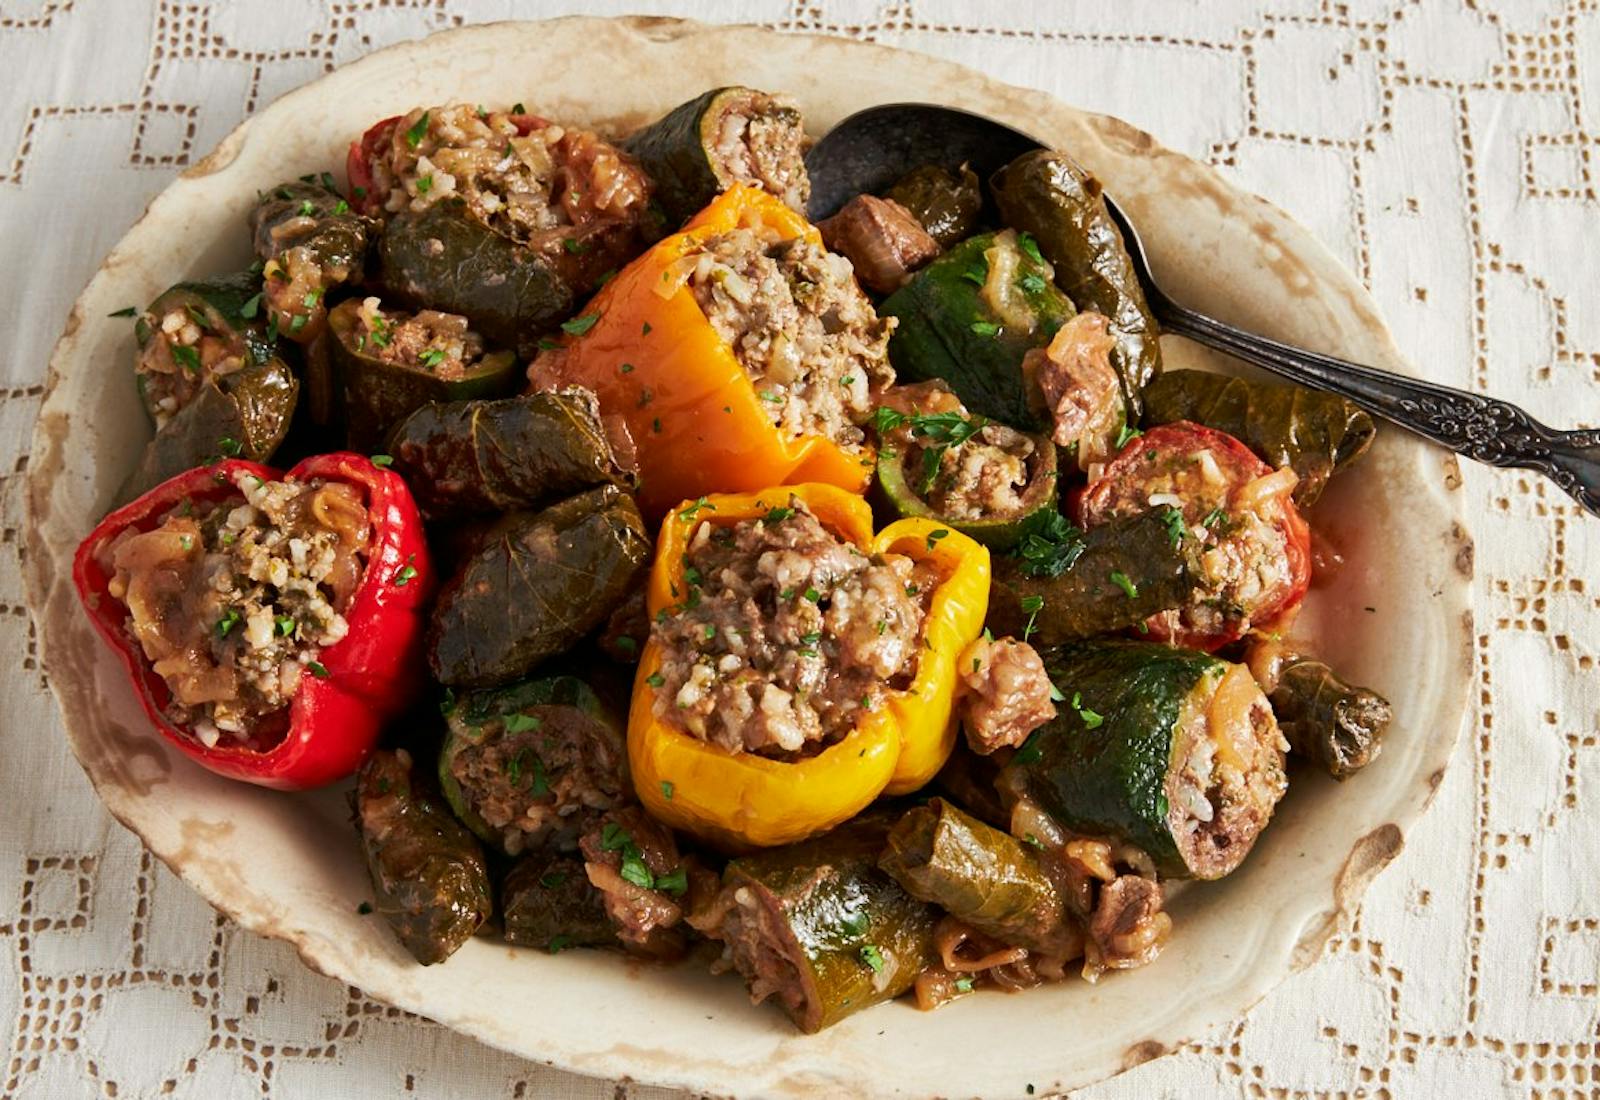 Stuffed Vegetables and Grape Leaves